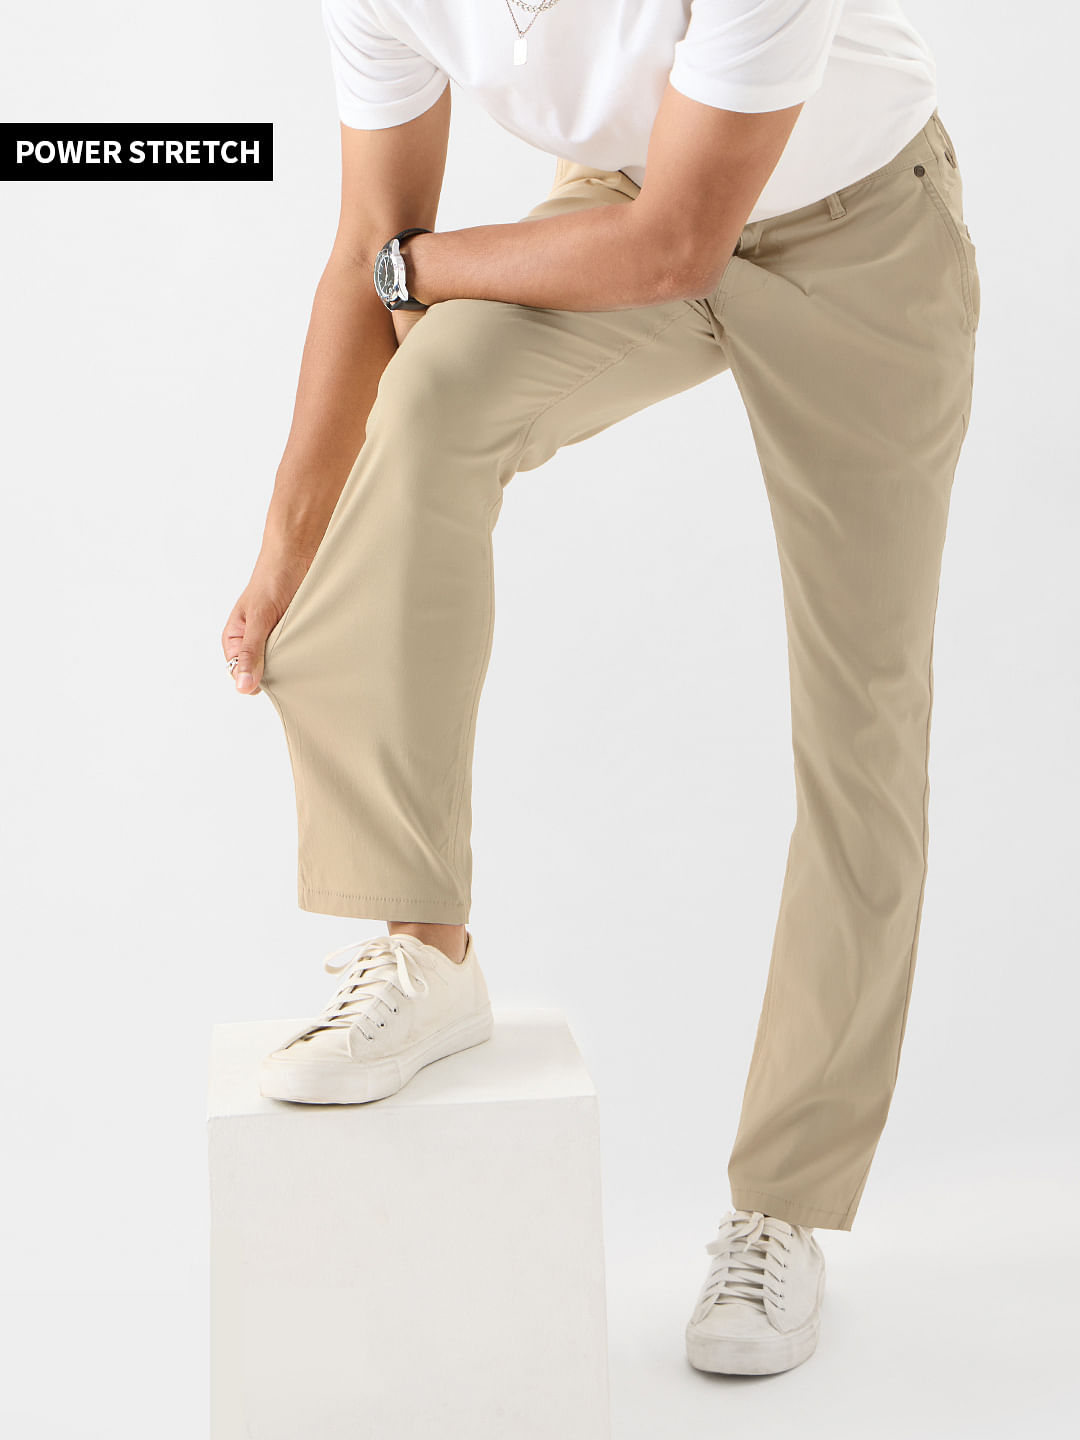 MEN'S COTTON RELAXED ANKLE PANTS | UNIQLO IN